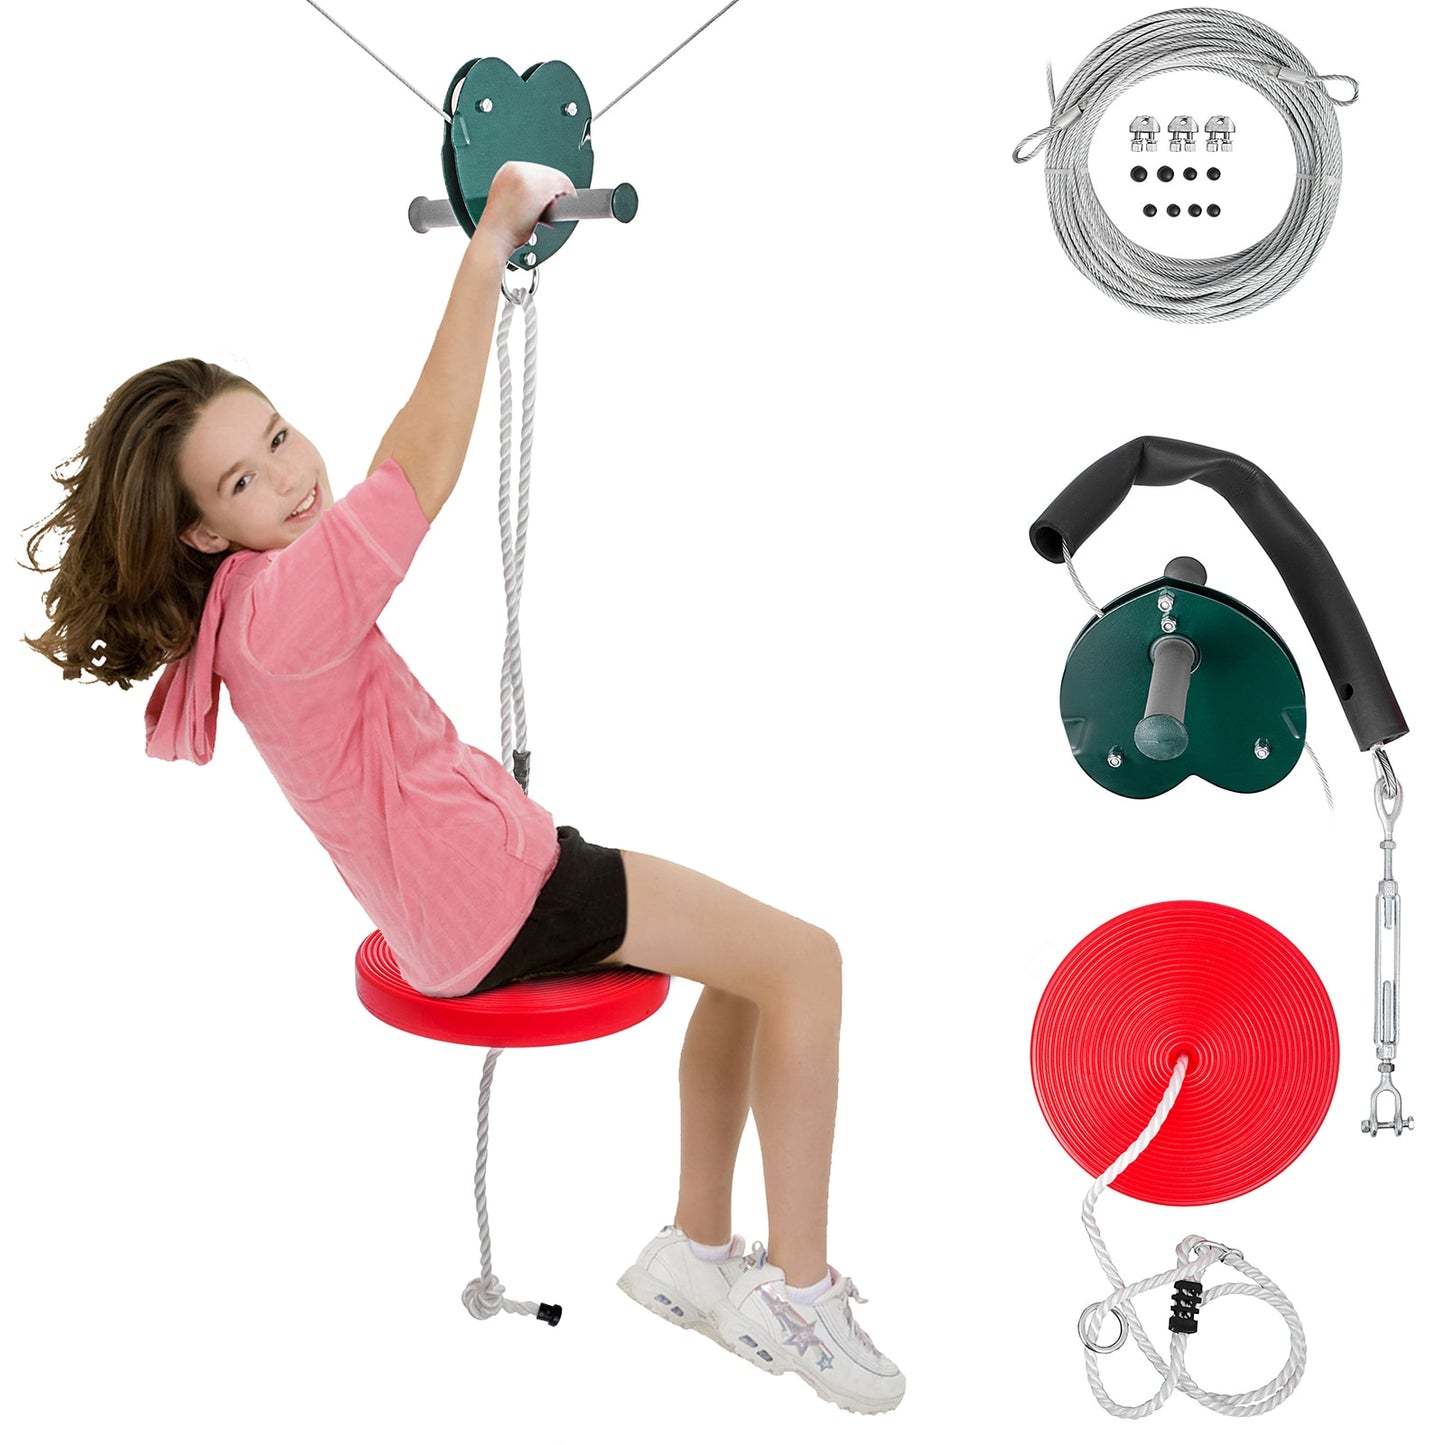 Zip line Kits for Backyard Zip Lines 90/100/110/120/150/160FT Included Swing Seat Brake and Trolley